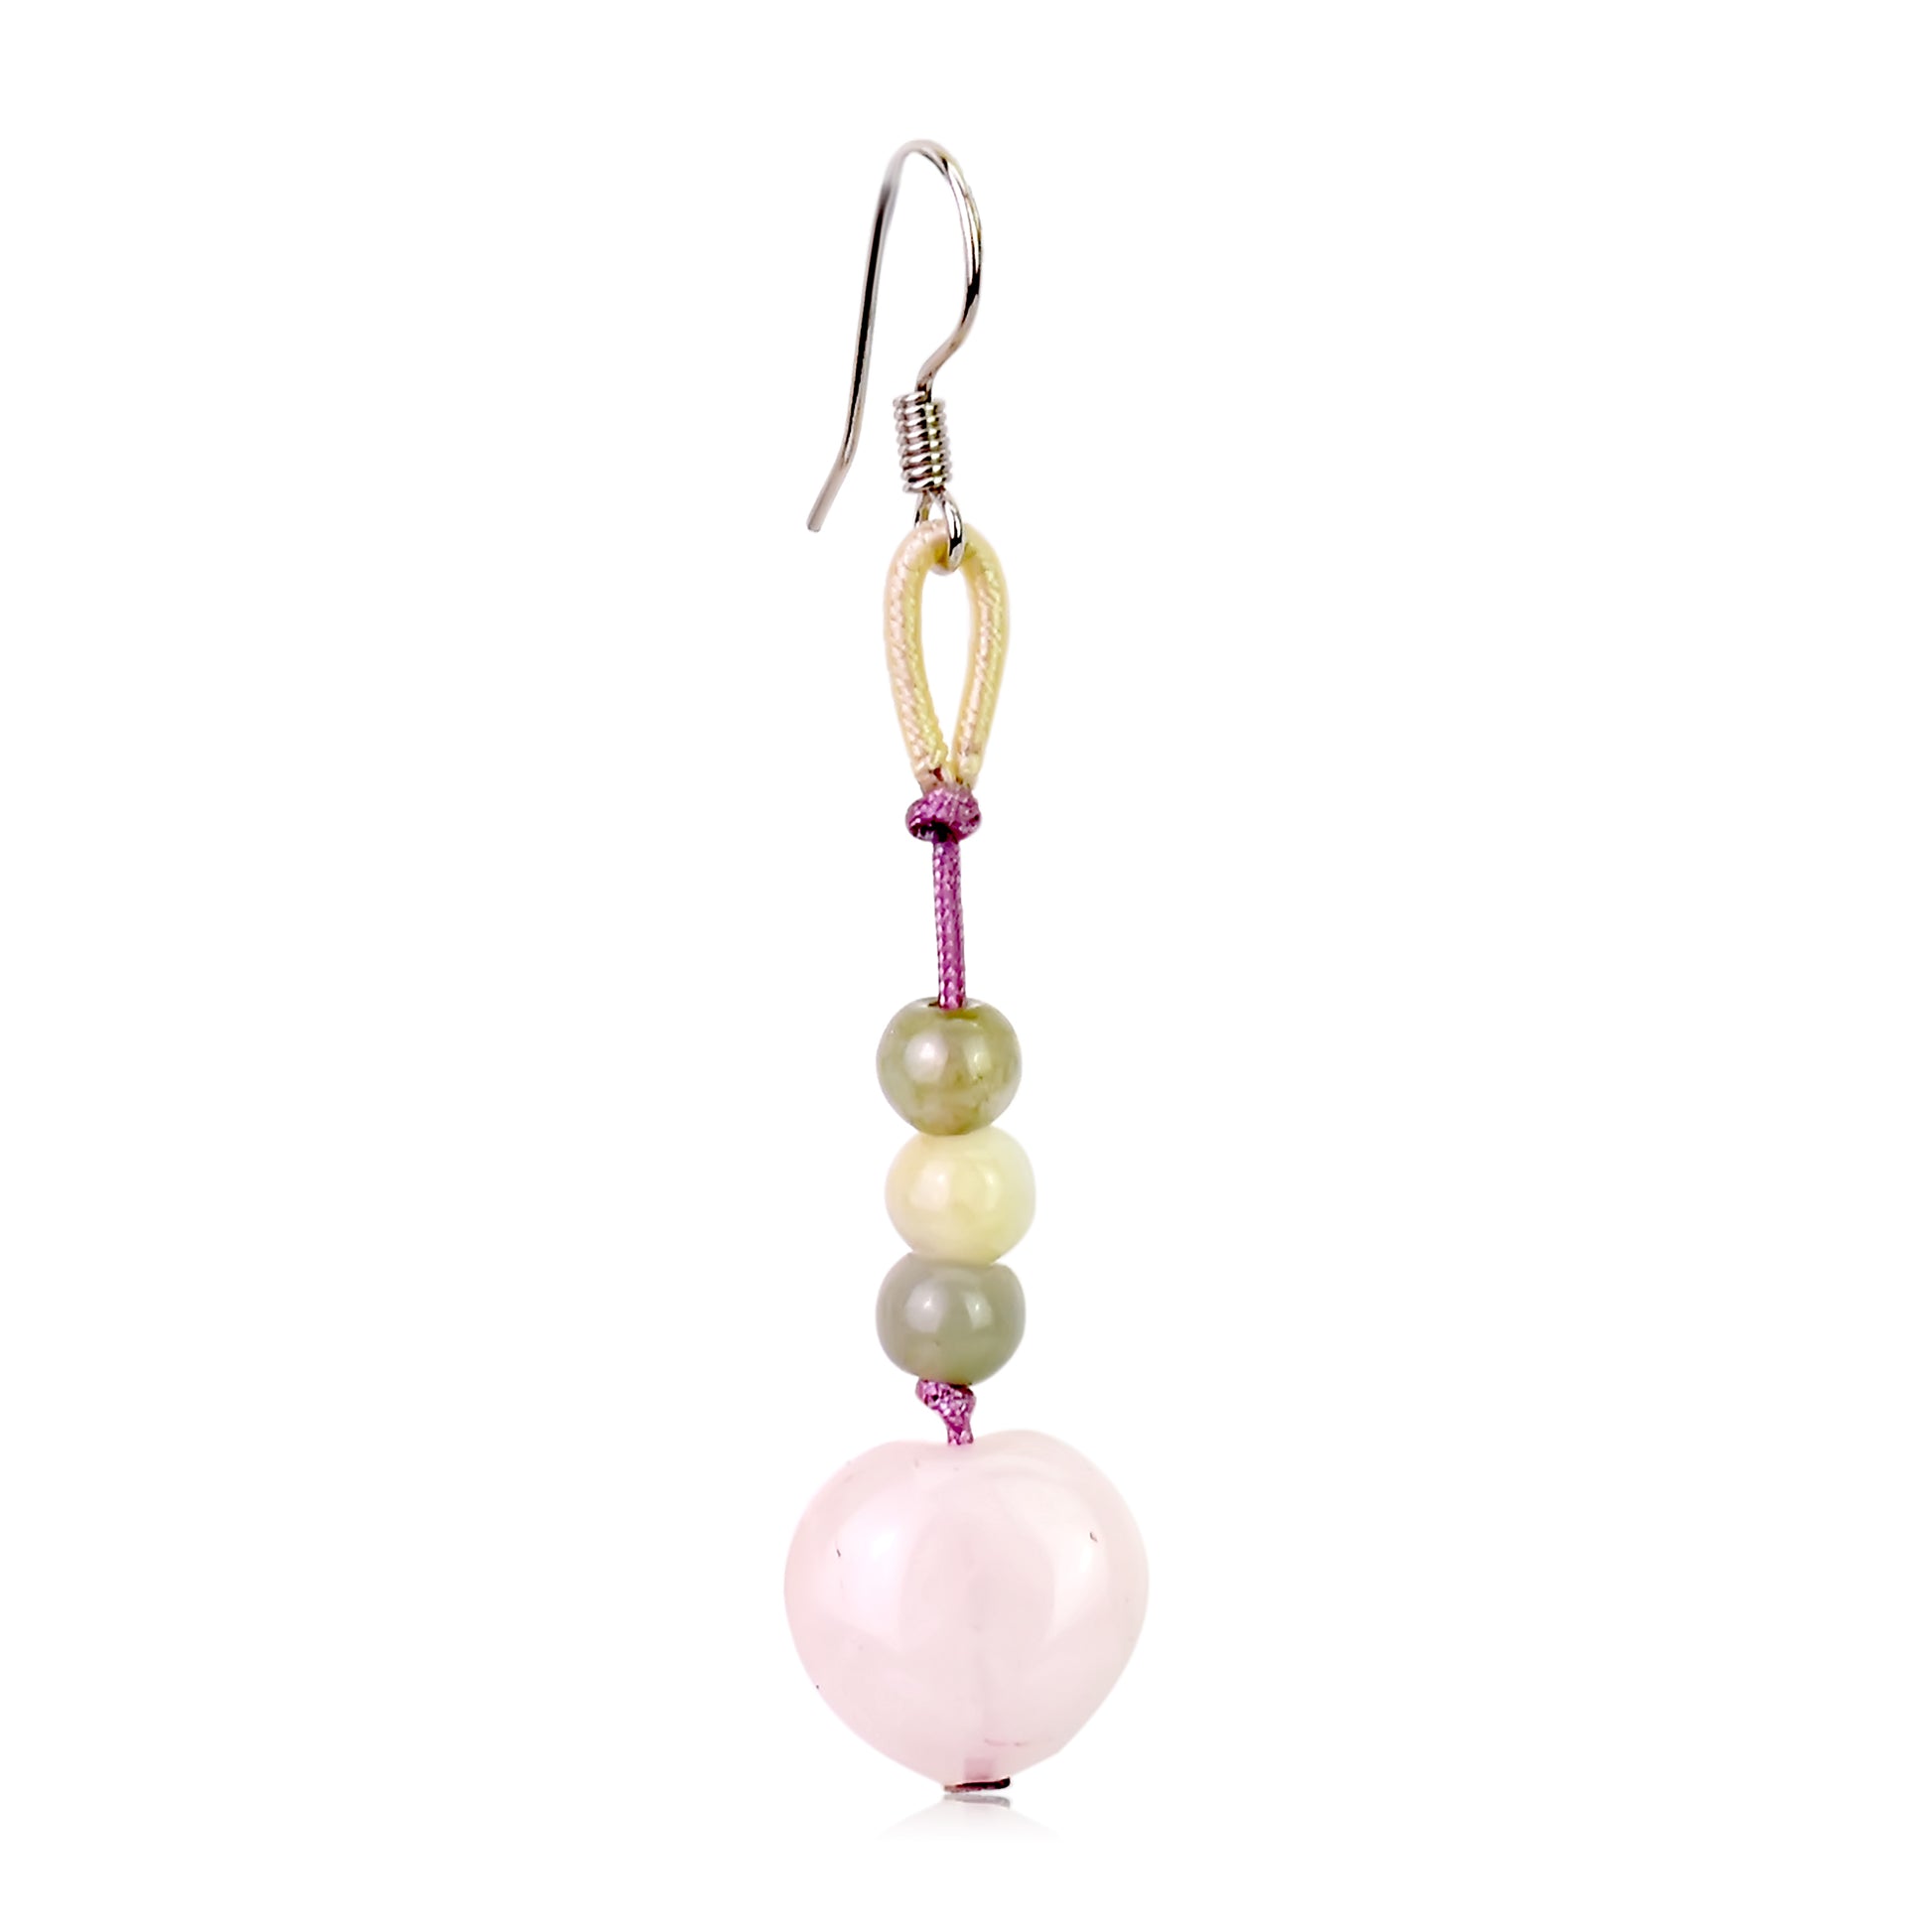 Feel Love with Delightful Rose Quartz Heart Earrings made with Lavender Cord